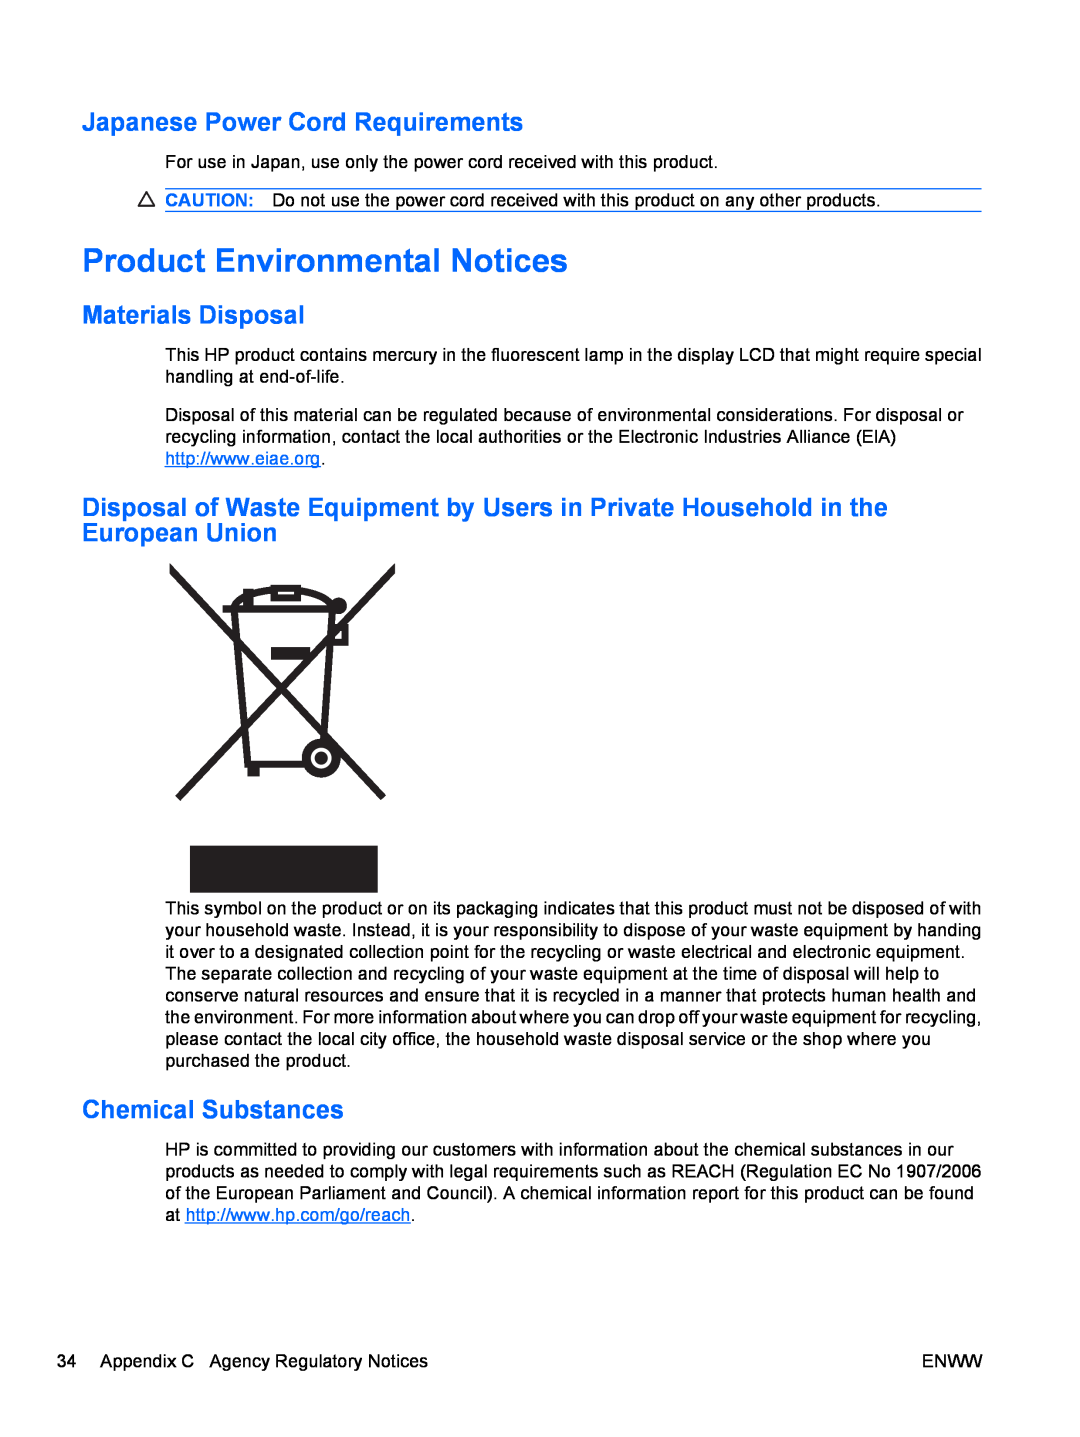 HP Q2210, Q2010 Product Environmental Notices, Japanese Power Cord Requirements, Materials Disposal, Chemical Substances 